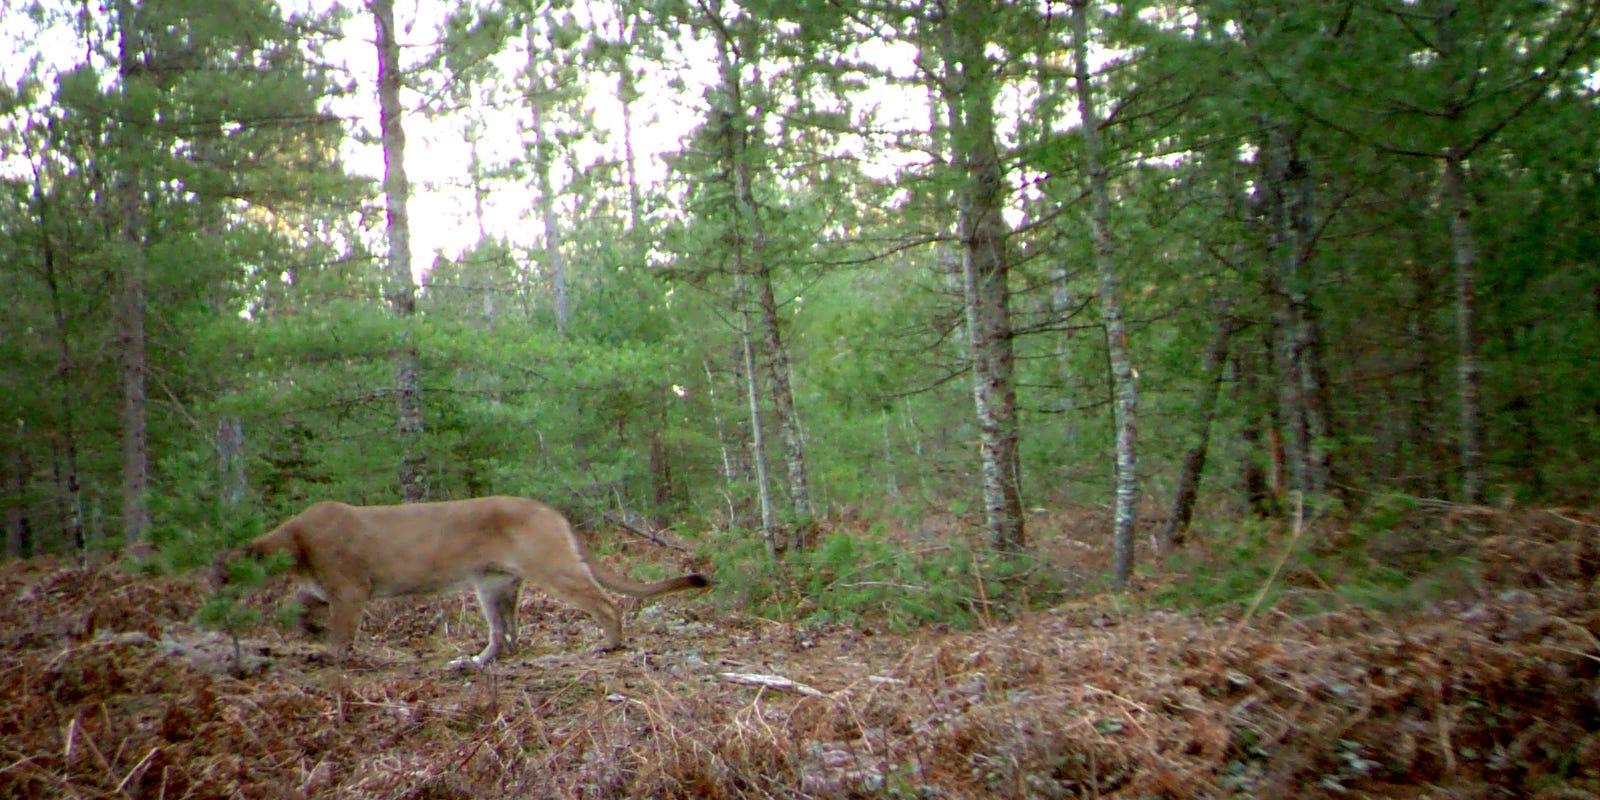 Dnr Confirms Cougar Sightings In Up